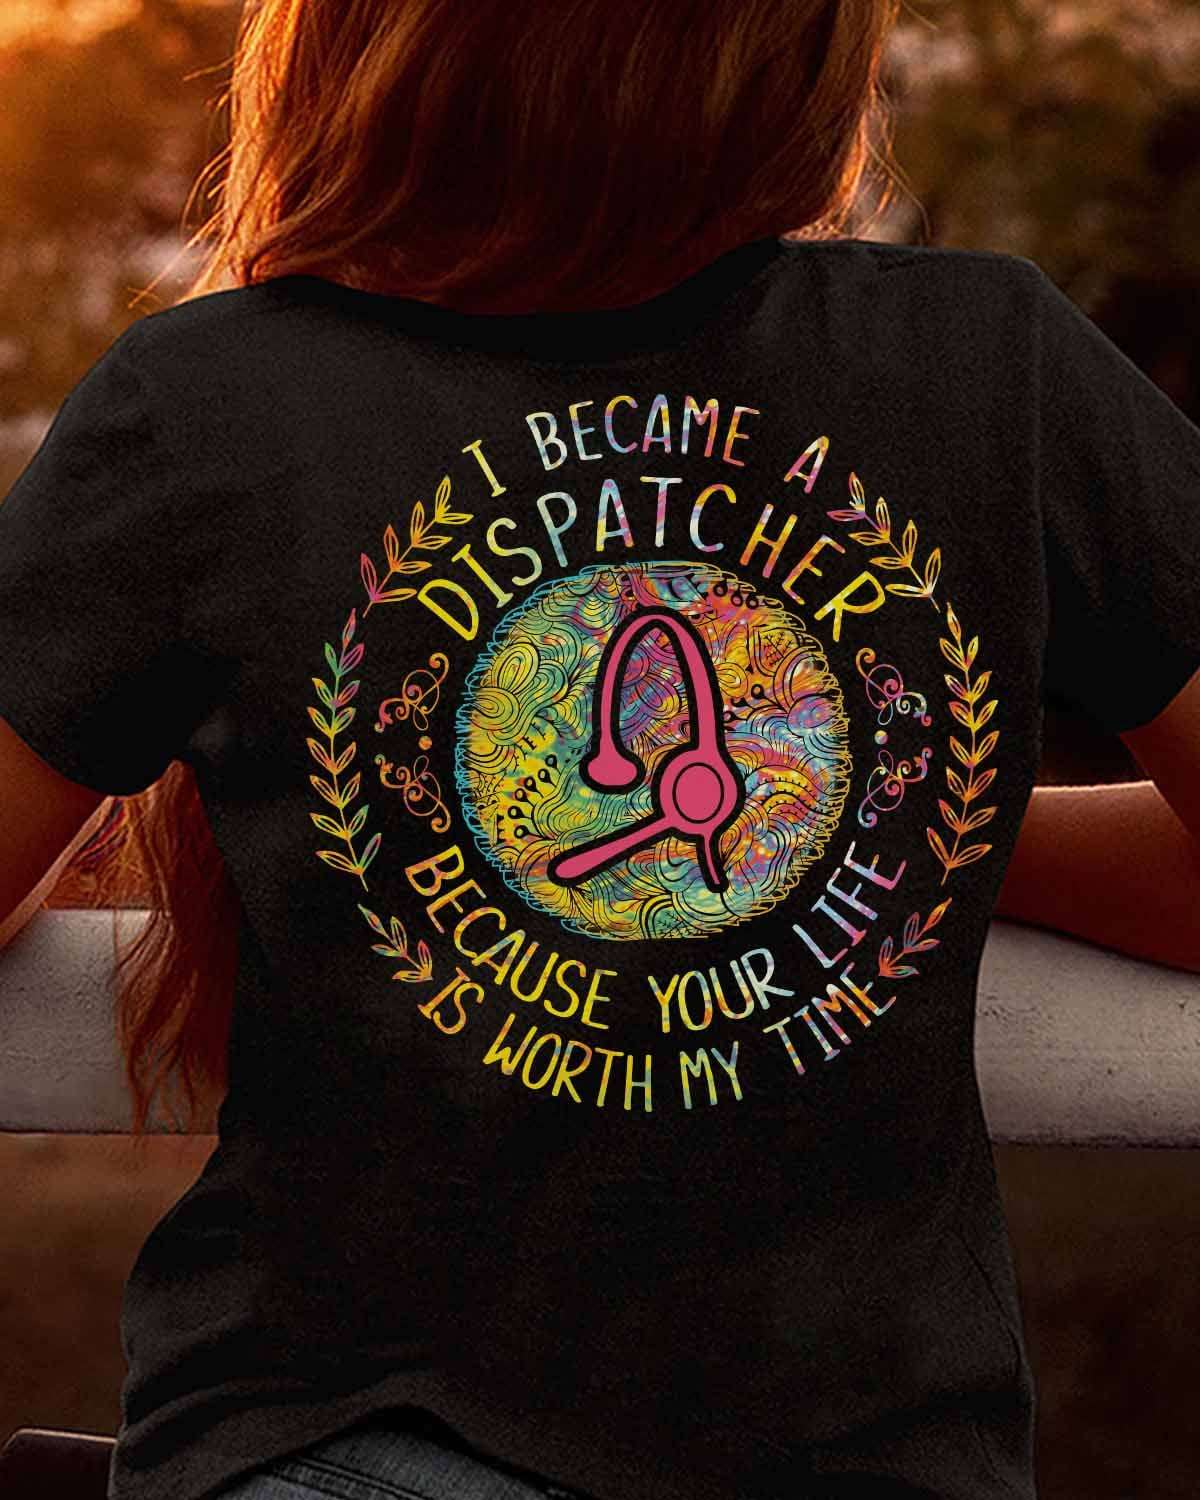 I became a dispatcher because your life is worth my time - Your life matter, dispatcher the job